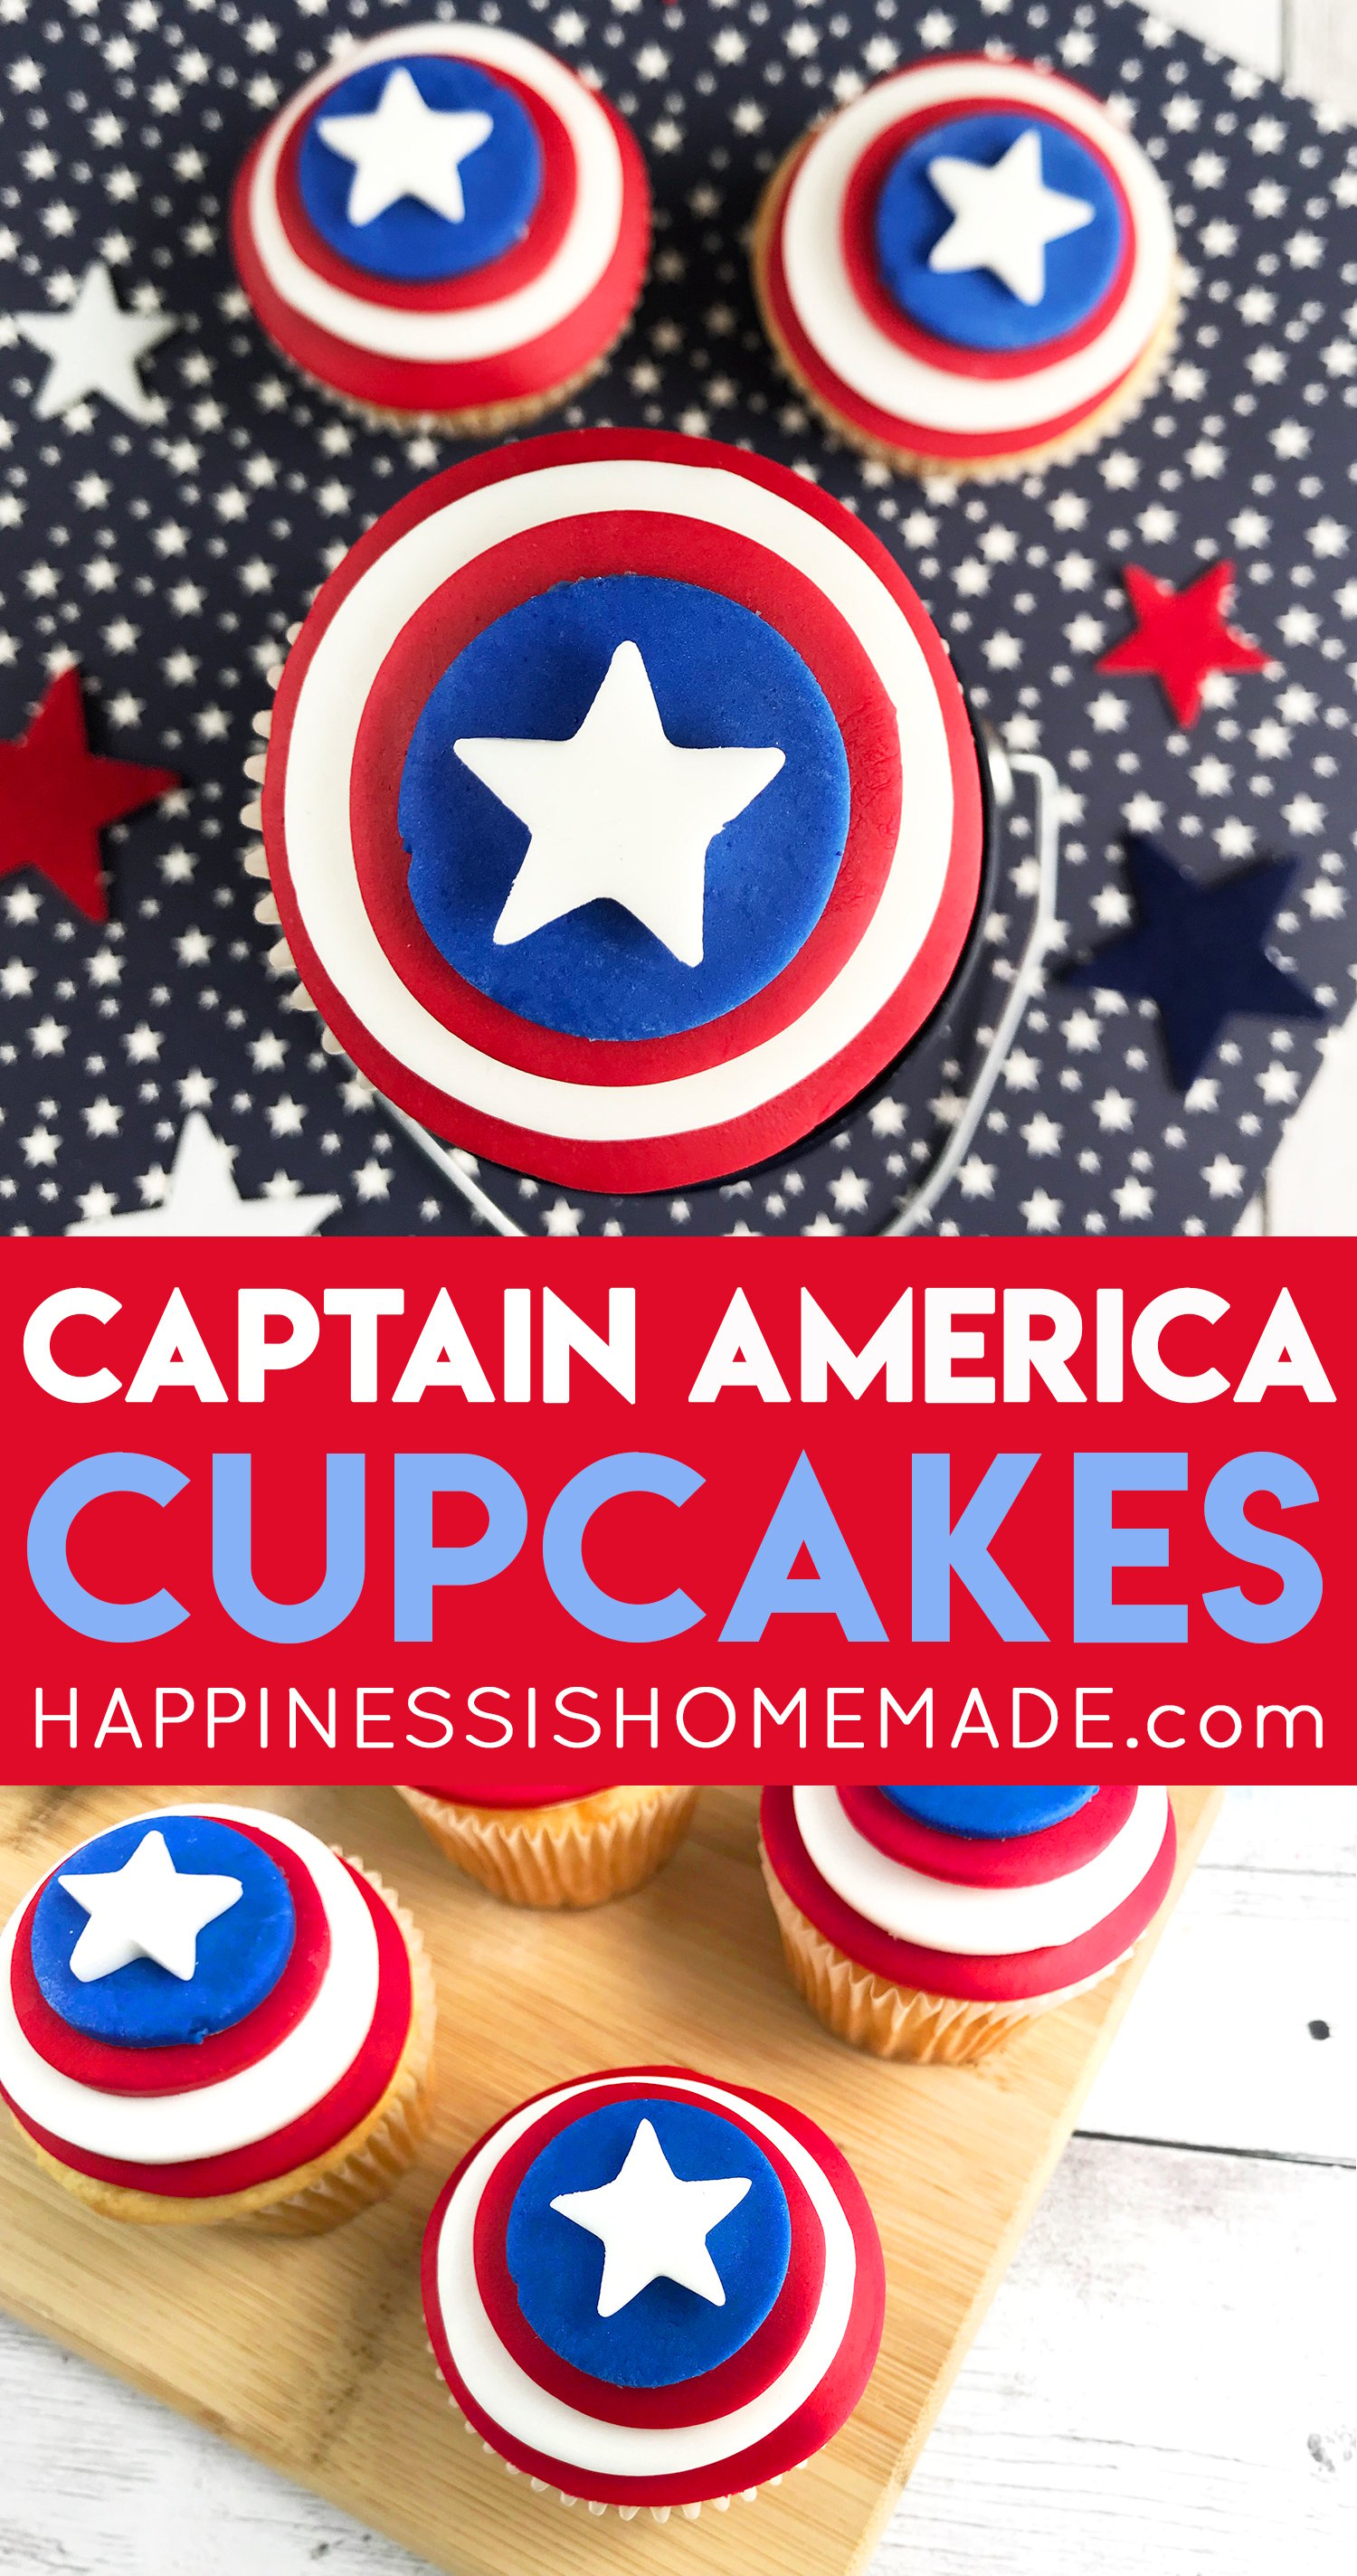 captain america cupcakes from happiness is homemade